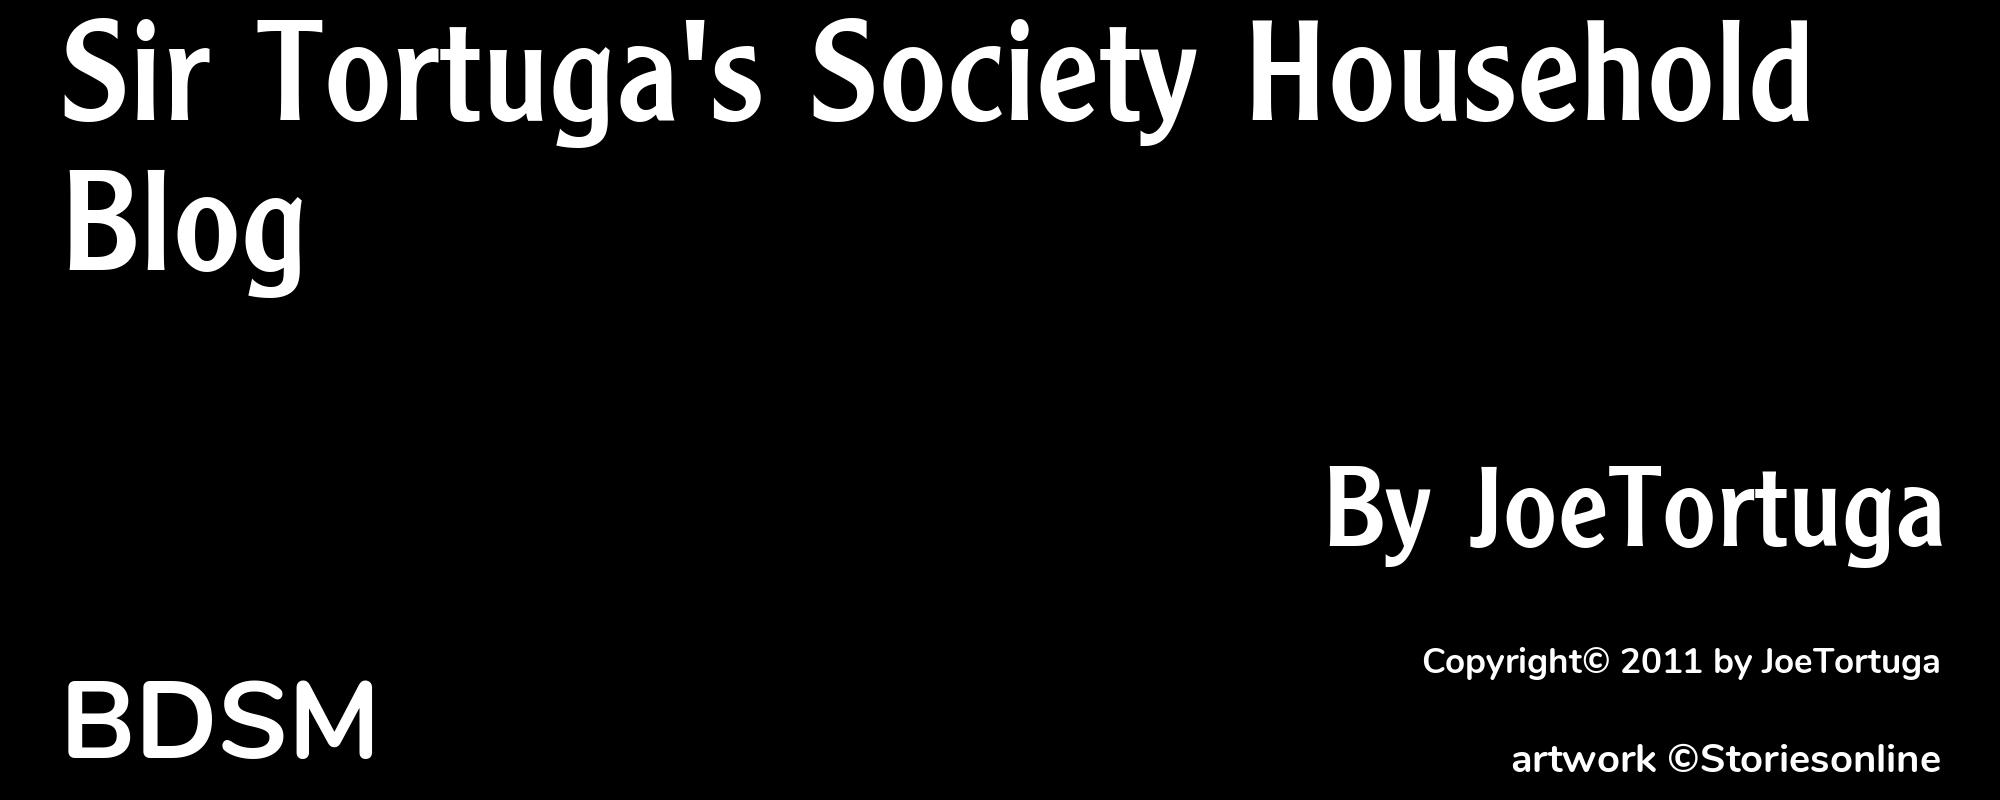 Sir Tortuga's Society Household Blog - Cover